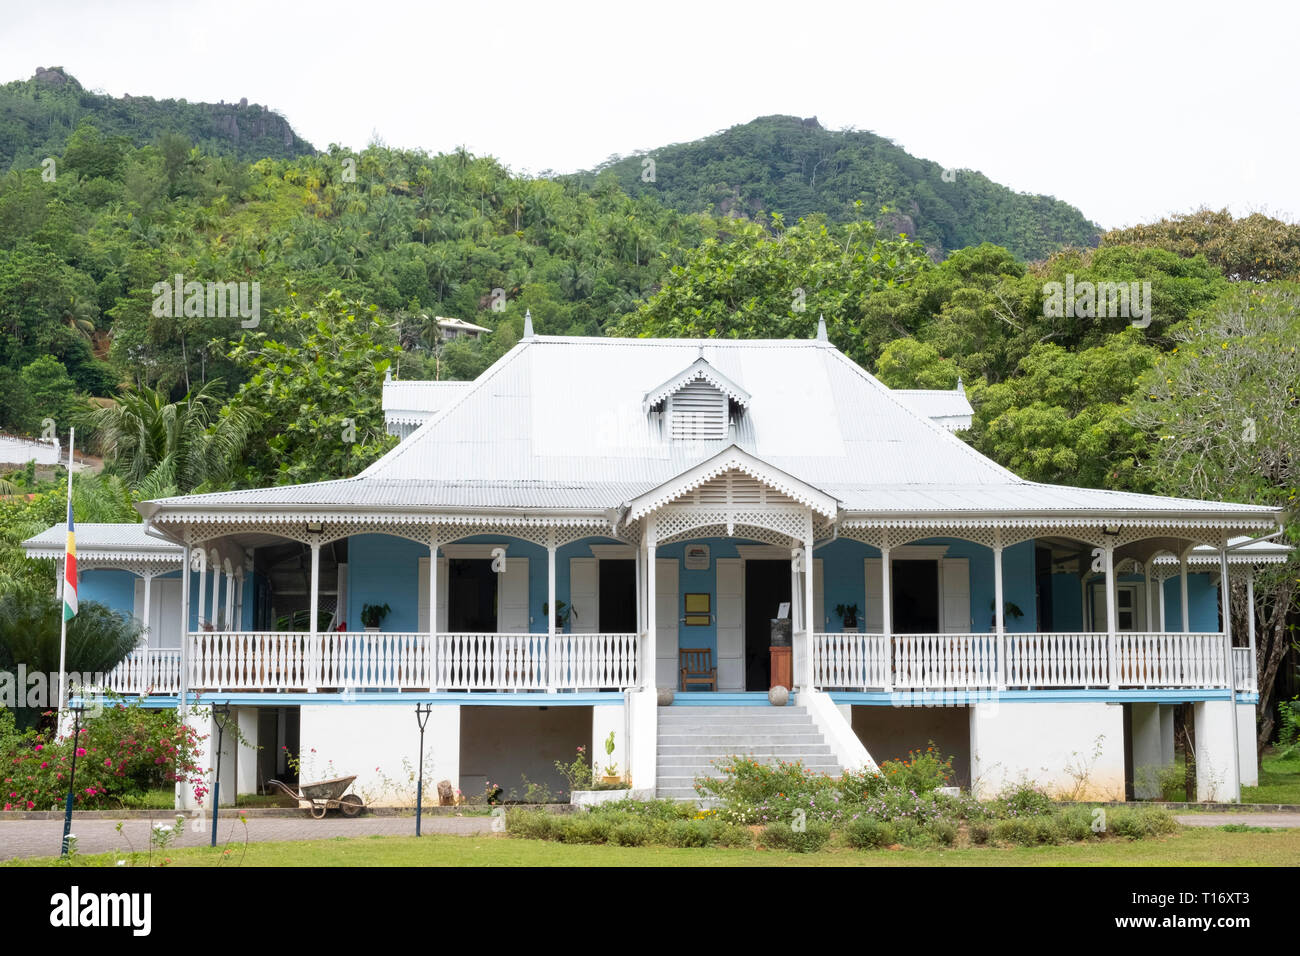 The Plantatation House or Grand Caz at the Domain de Val des Pres, Craft Village on Mahe, the Seychelles Stock Photo